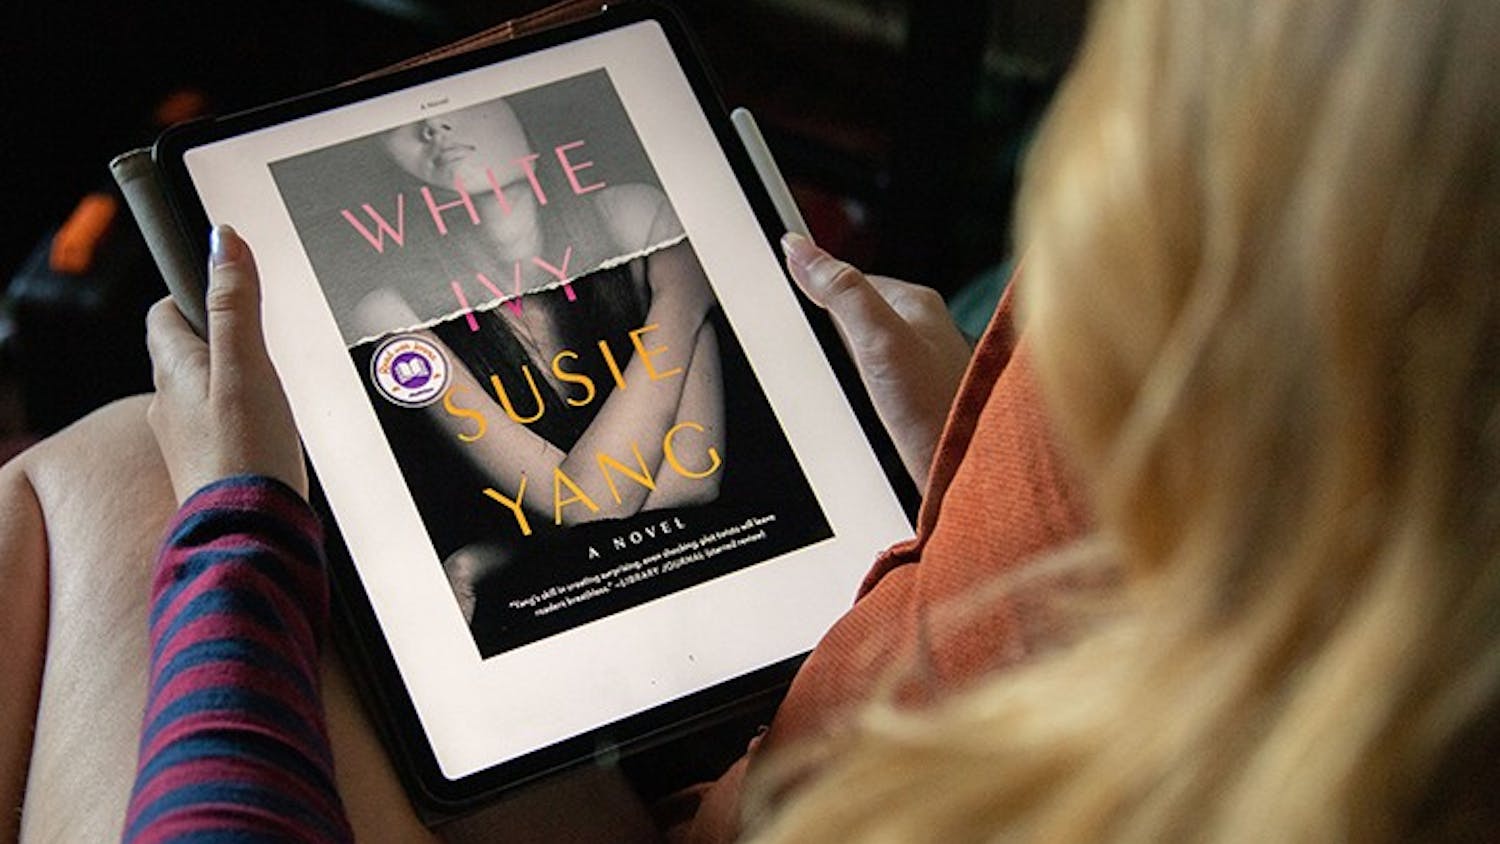 &nbsp;&nbsp;A woman sits down on a chair to read the e-book version of Susie Yang's novel "White Ivy.”&nbsp;